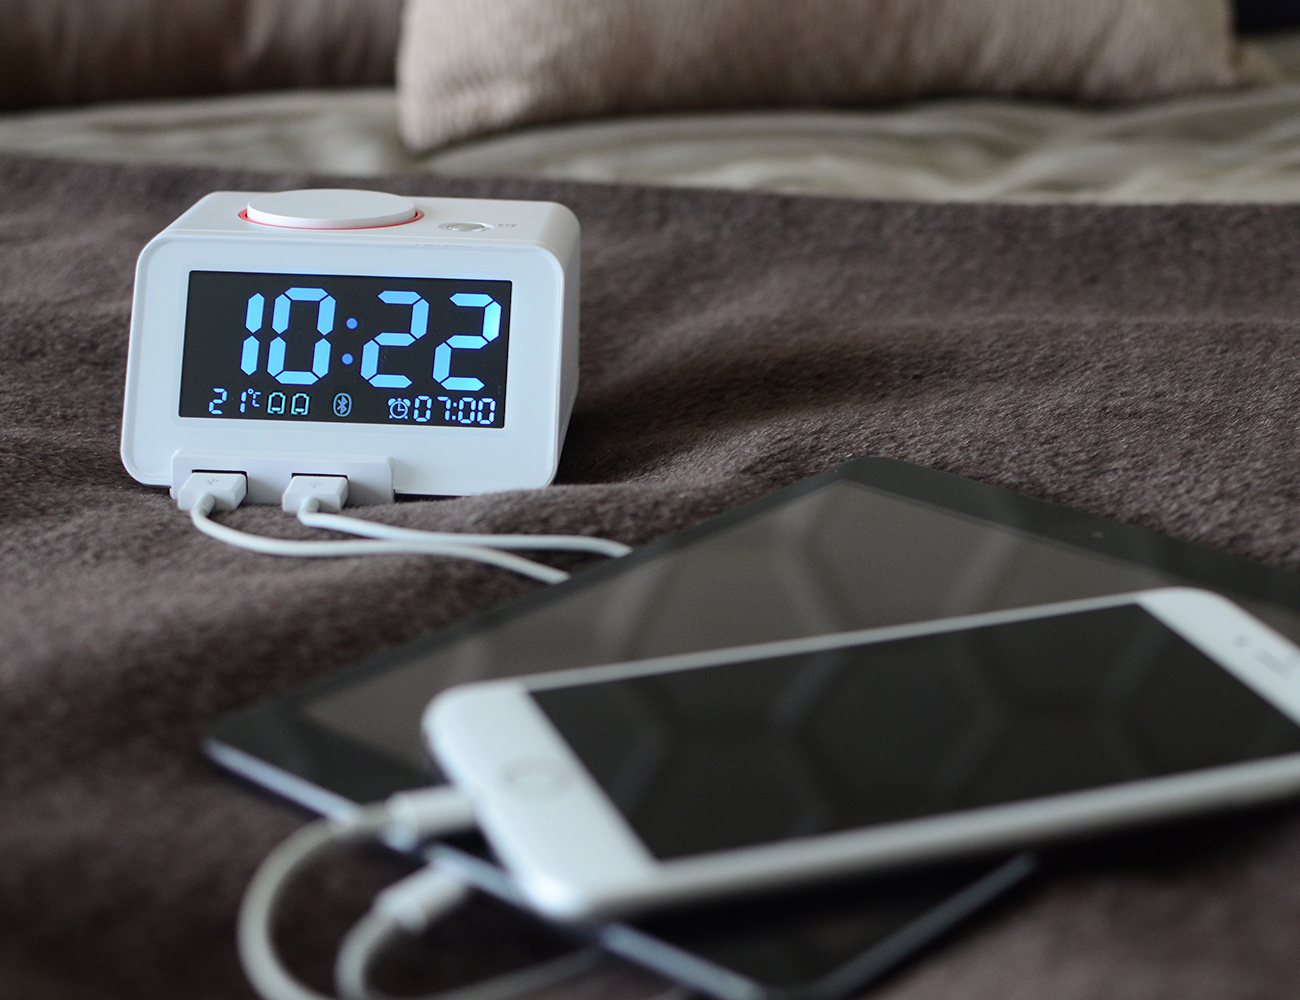 HomTime C1Pro: All-In-One Alarm, Speaker, Charger And More